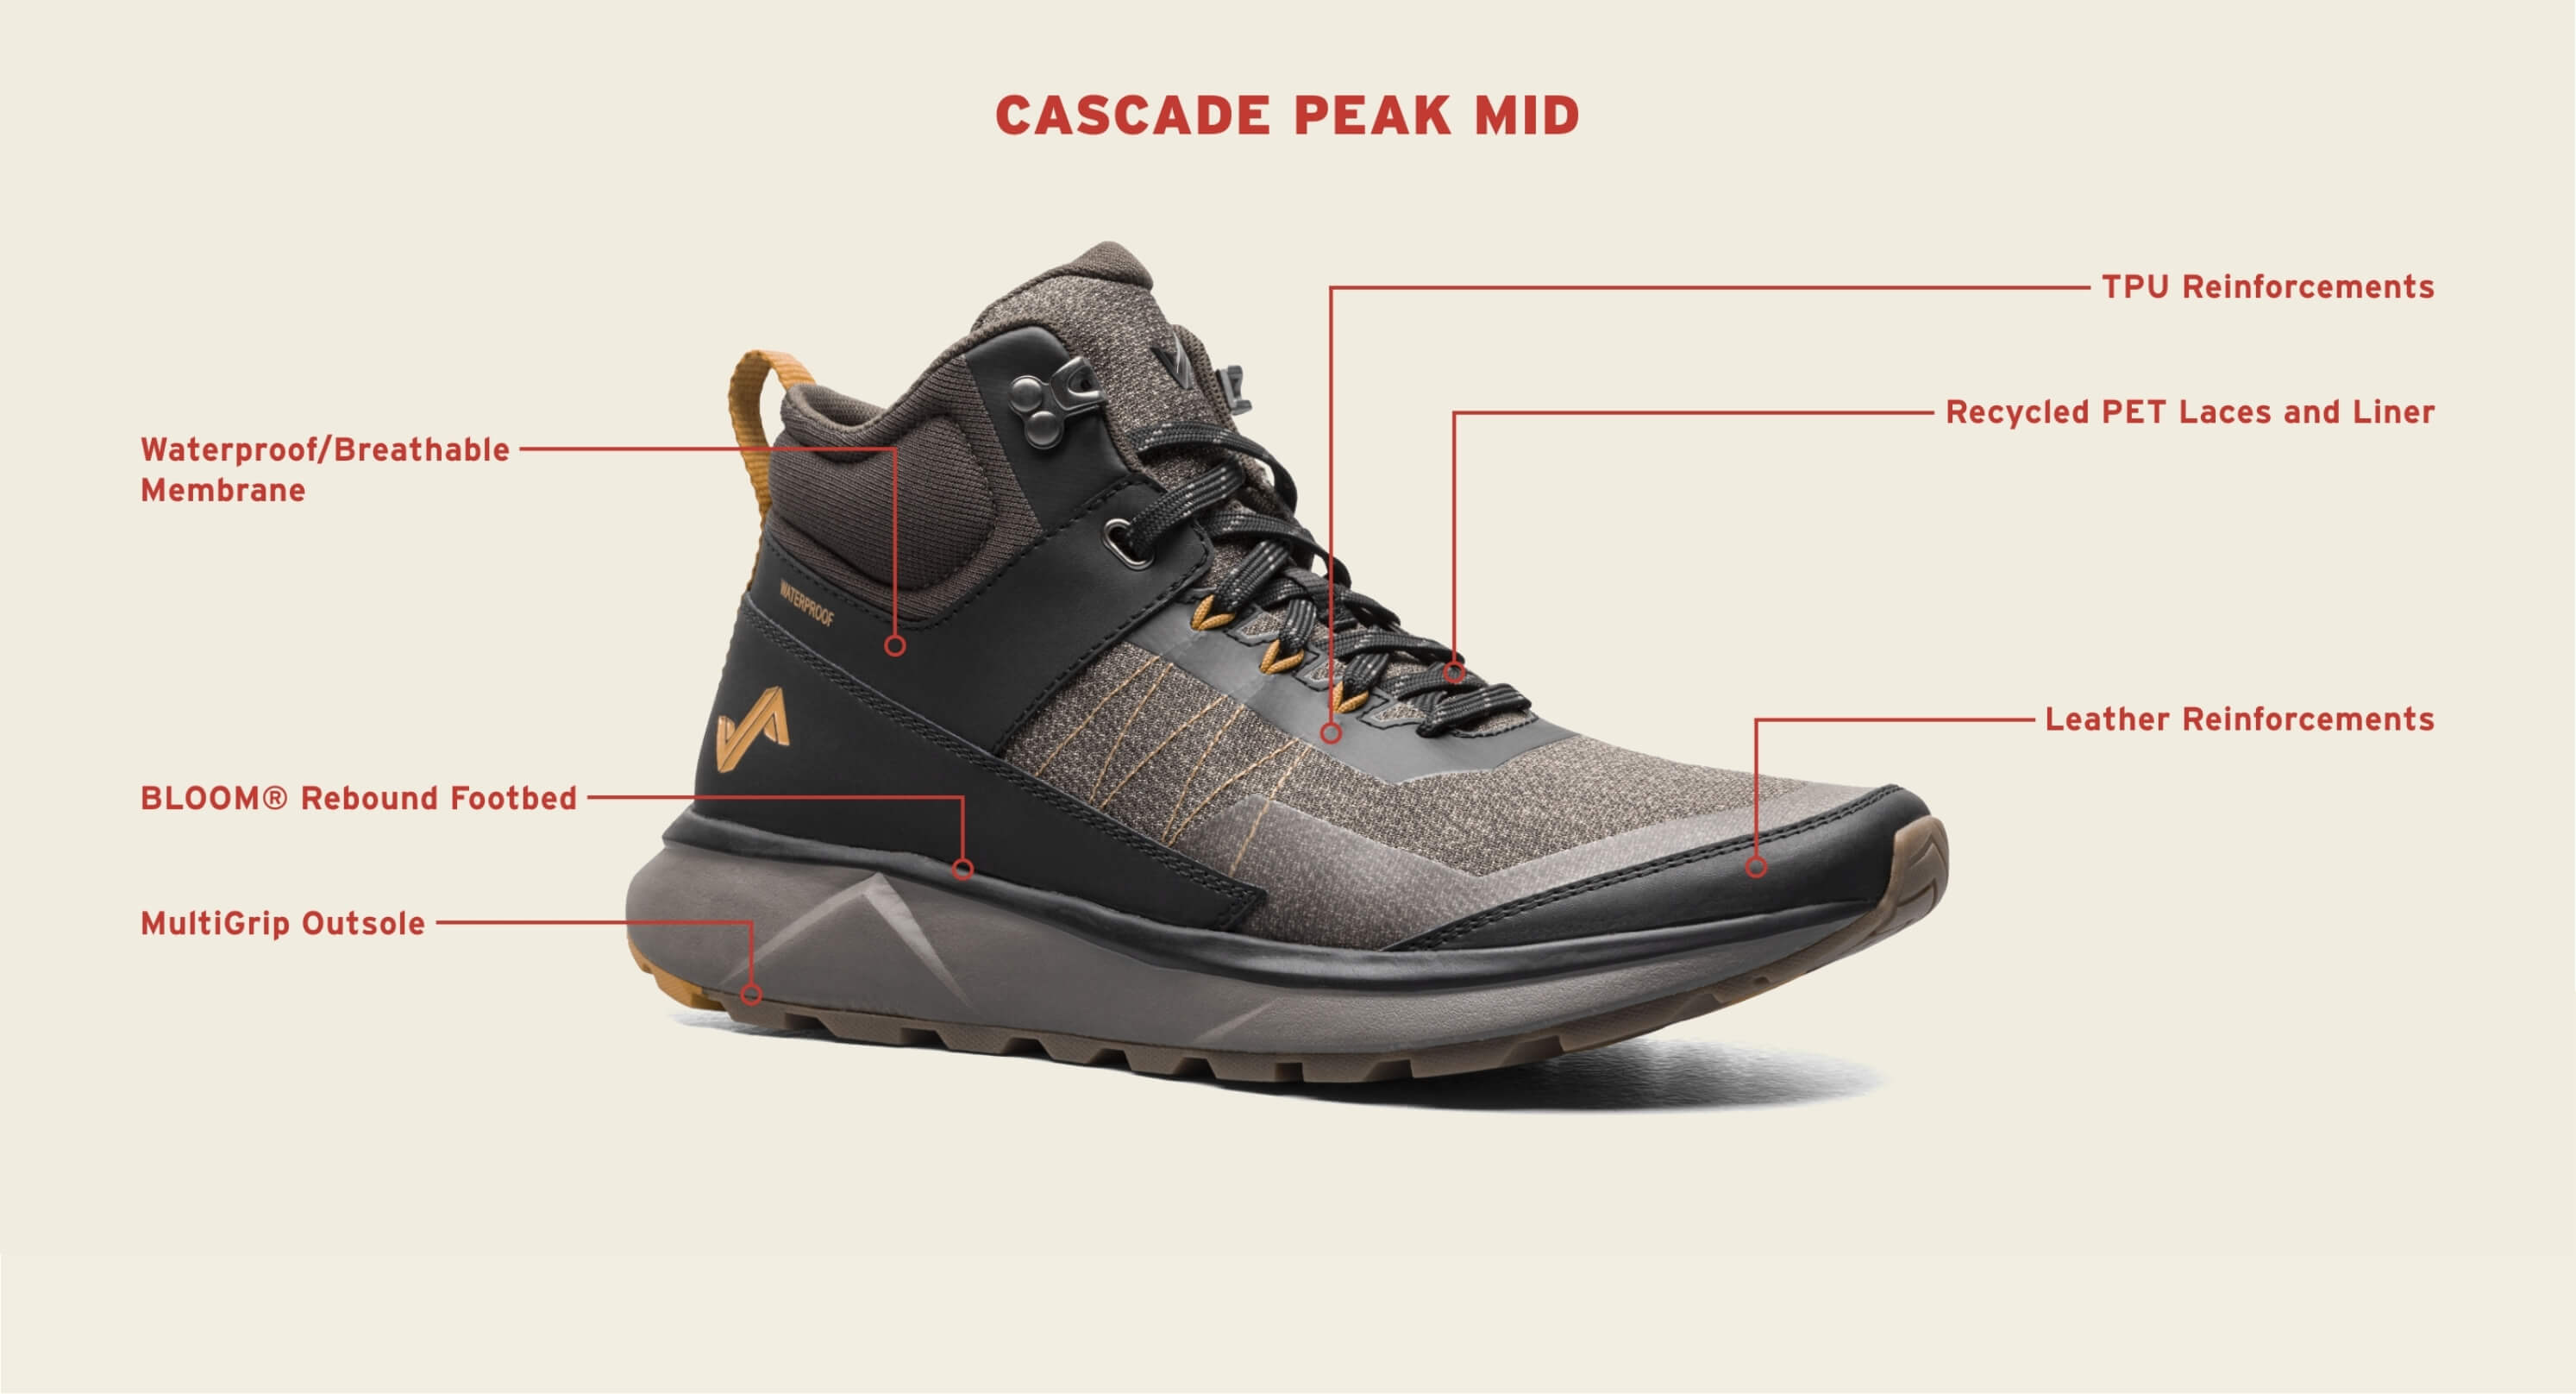 Image features the tech callouts for the Men's Cascade Peak Mid. 